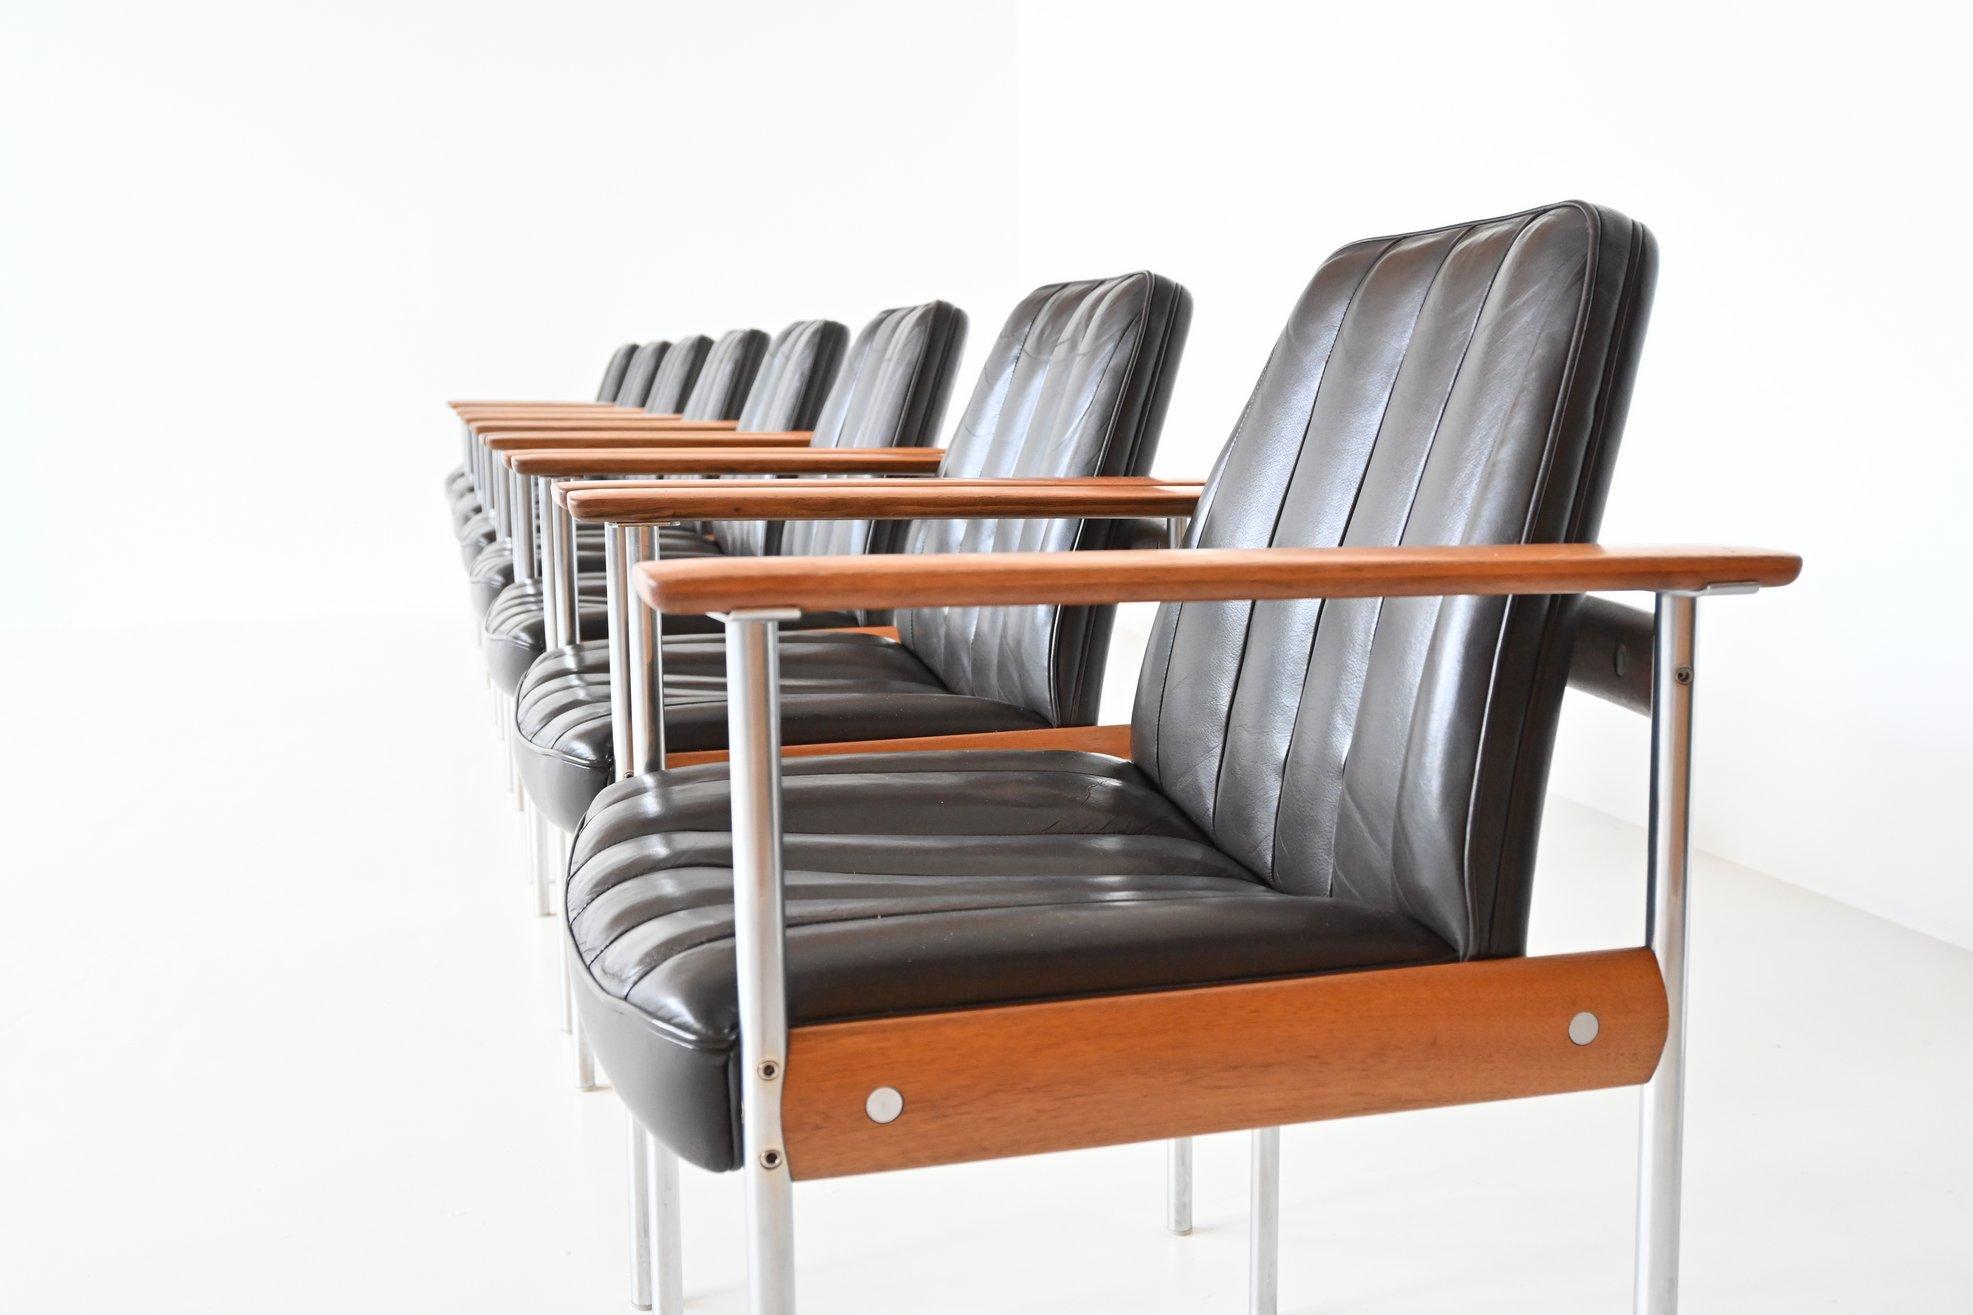 Very nice and rare set of eight armchairs model 1001 designed by Sven Ivar Dysthe for Dokka Møbler, Norway 1960. These office or dining chairs have a base made of walnut wood and stainless steel pieces and the shell is upholstered in original dark